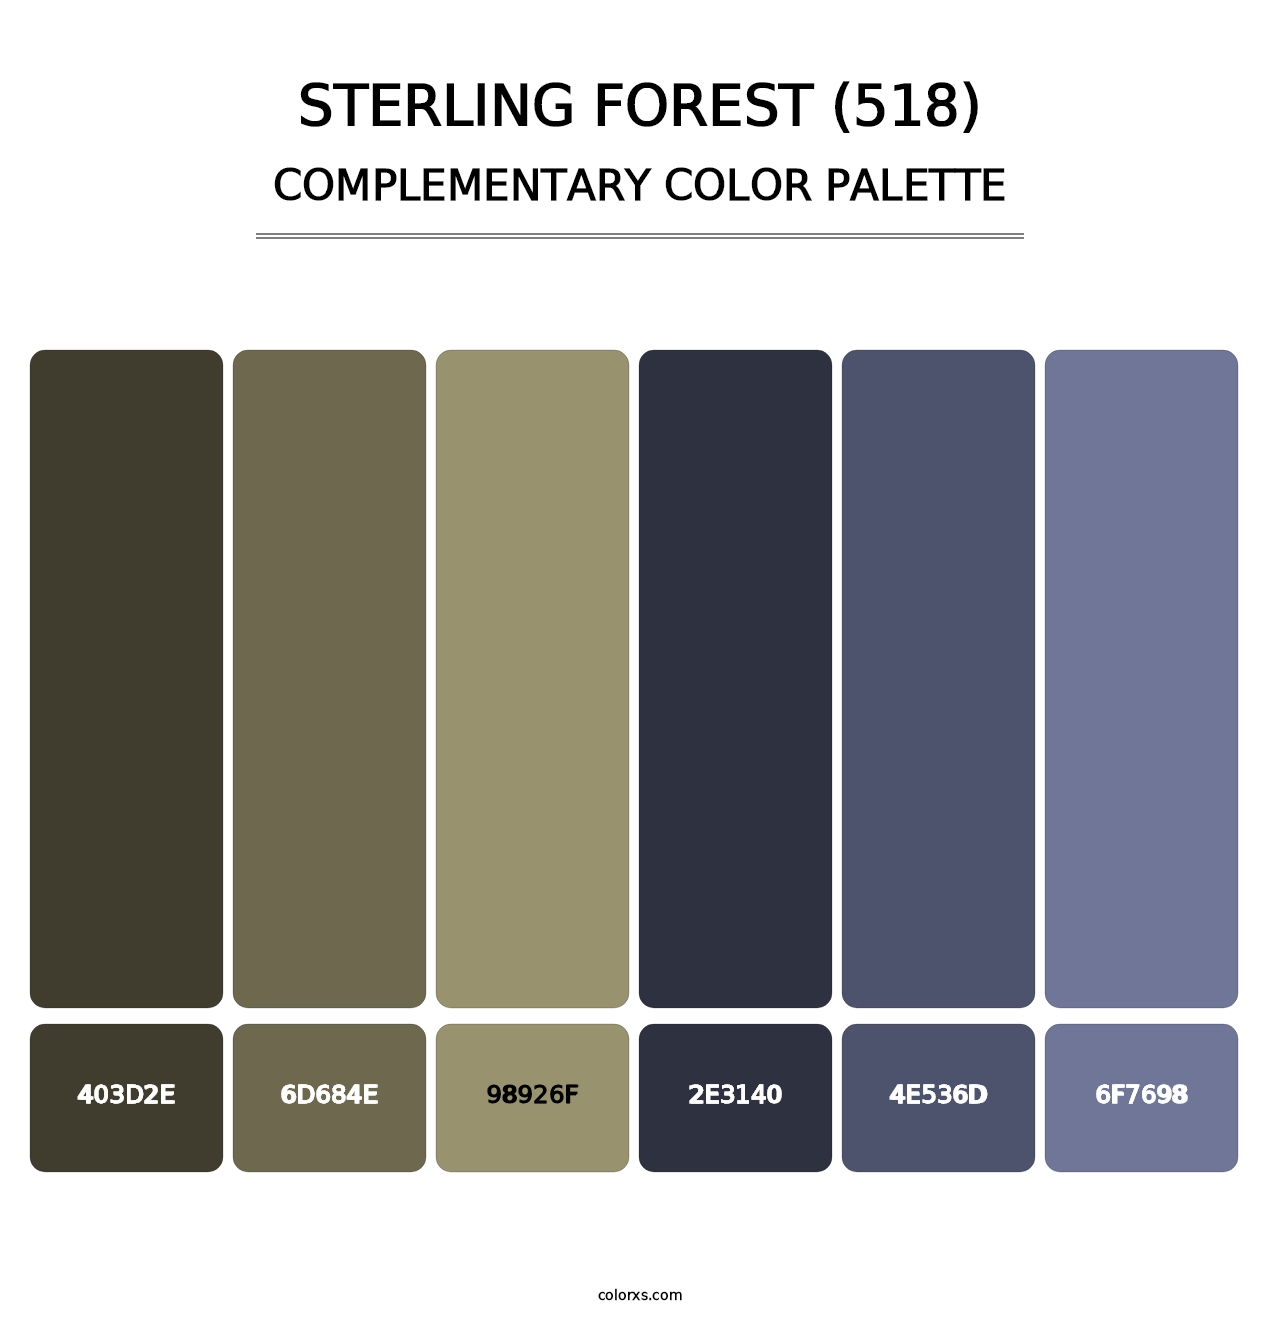 Sterling Forest (518) - Complementary Color Palette